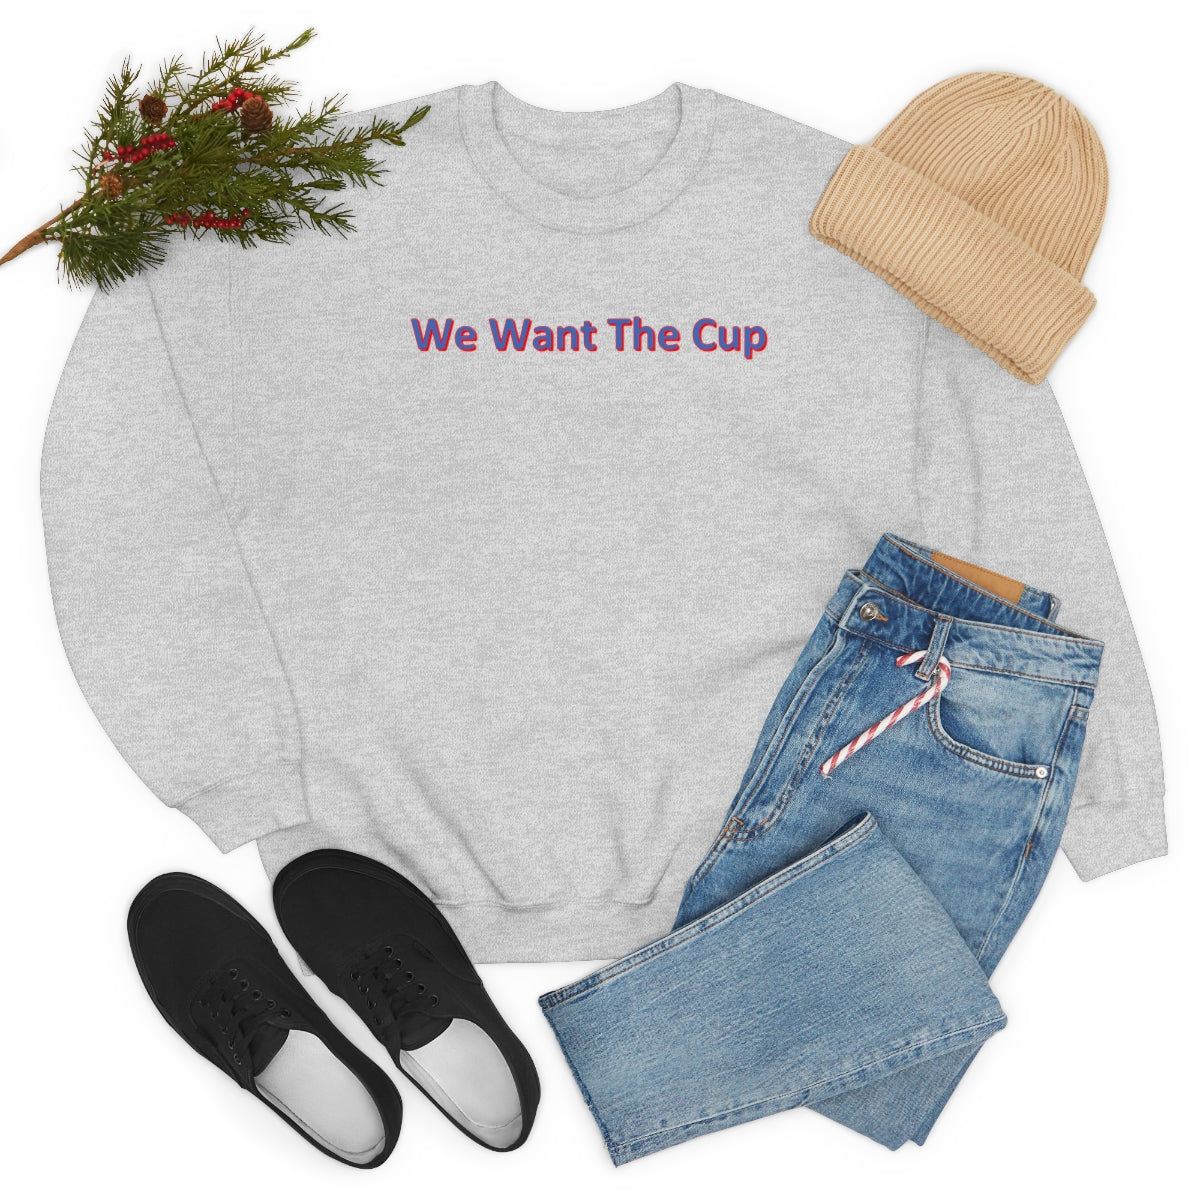 We Want The Cup Sweater - IsGoodBrand